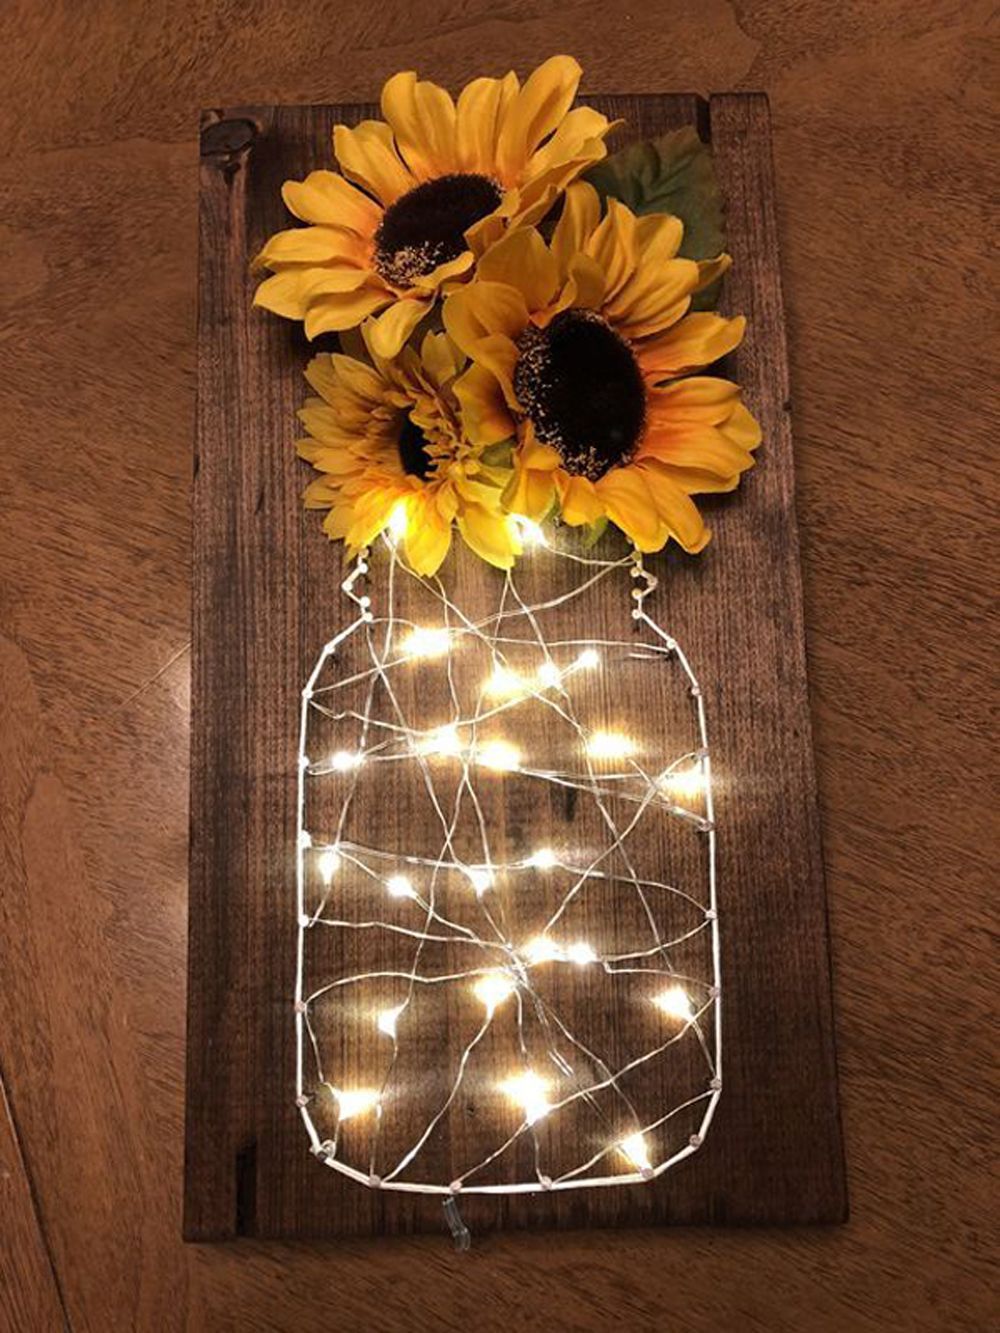 Dreaming over the stars ? ? Added some lights ???????????????????? - Dreaming over the stars ? ? Added some lights ???????????????????? -   17 diy Crafts tumblr ideas